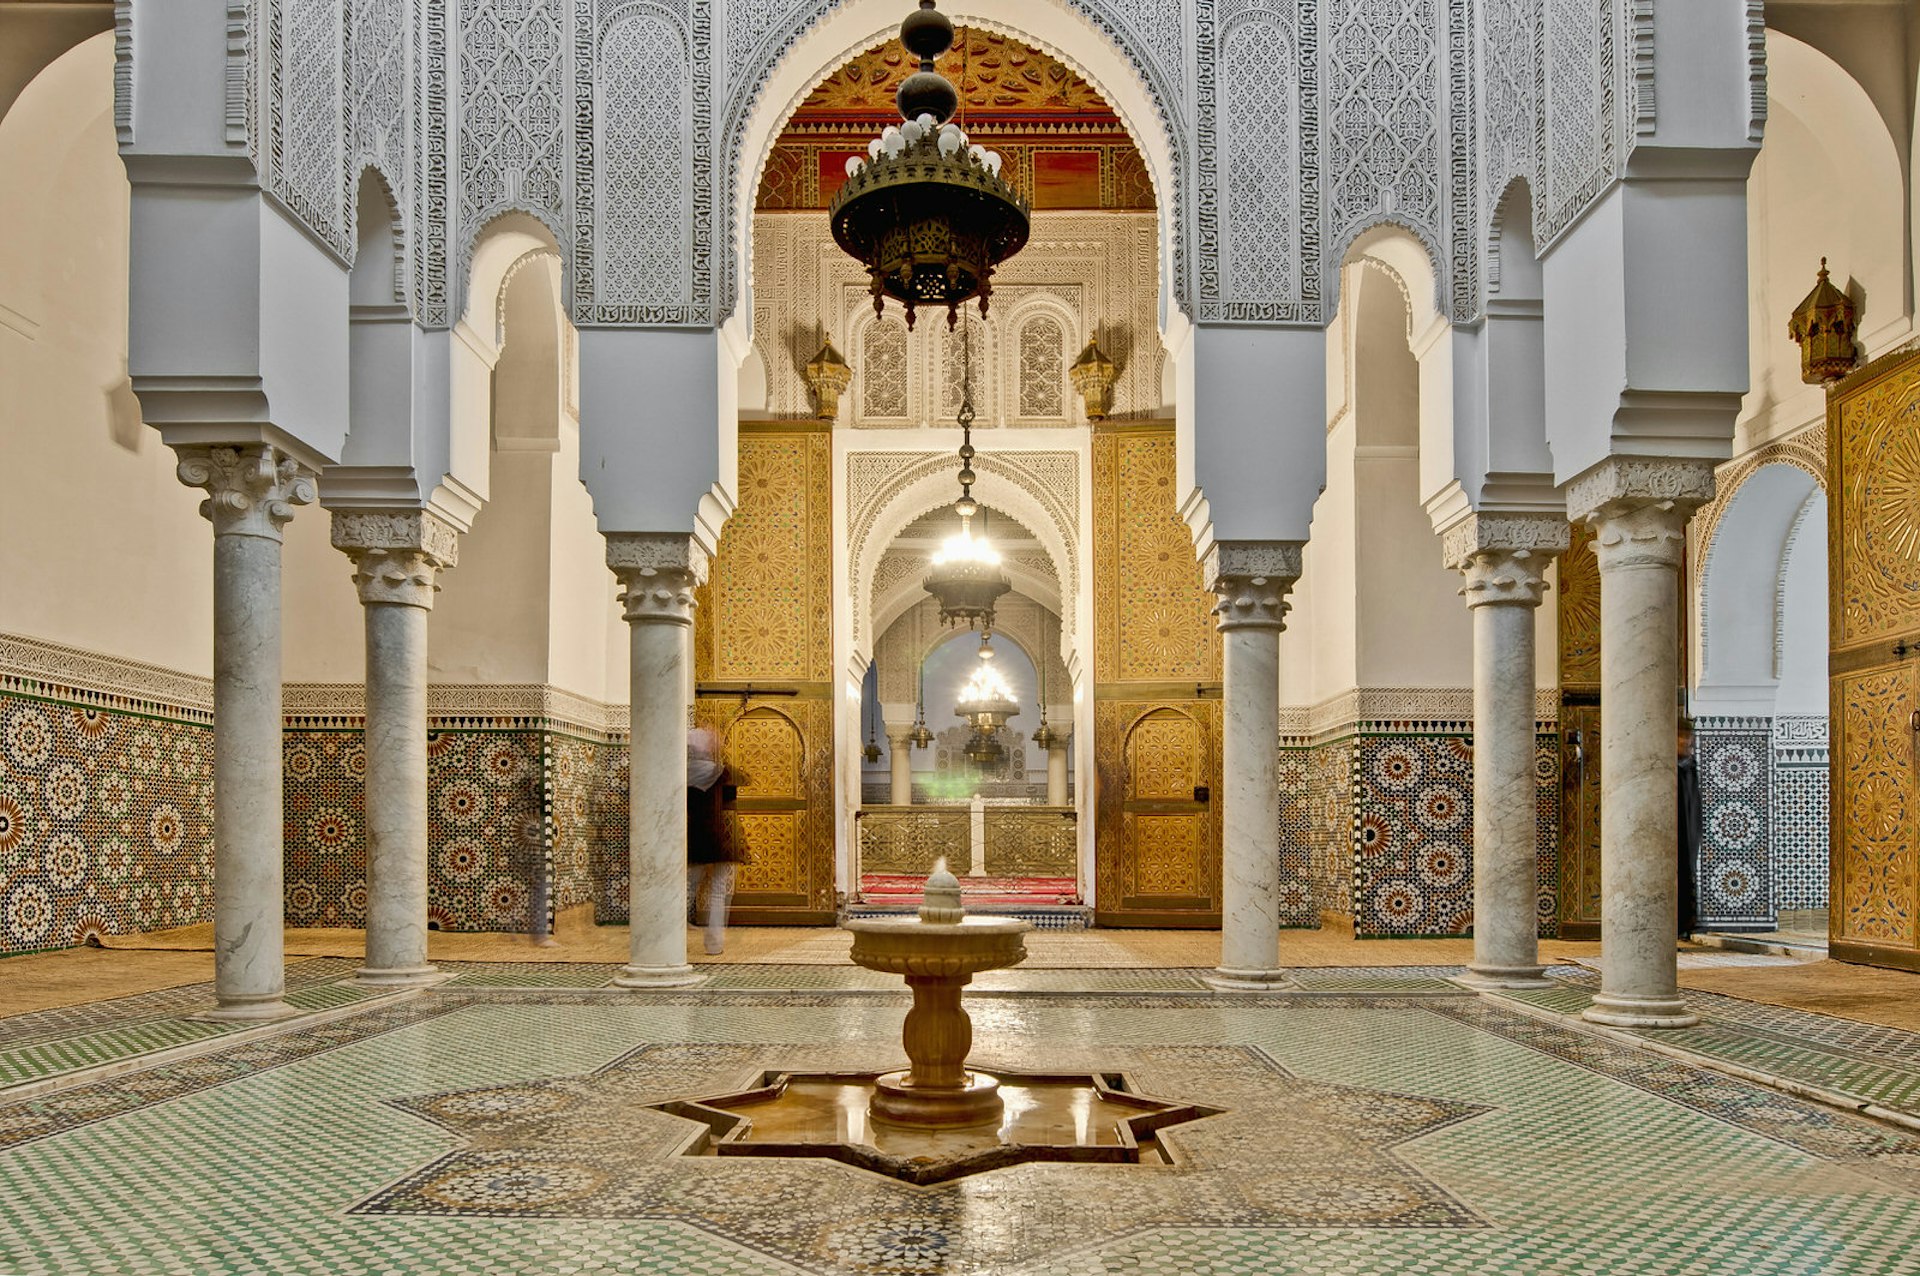 Moulay Ismail Mausoleum interior at Meknes, Morocco. Image by Anibal Trejo / Shutterstock